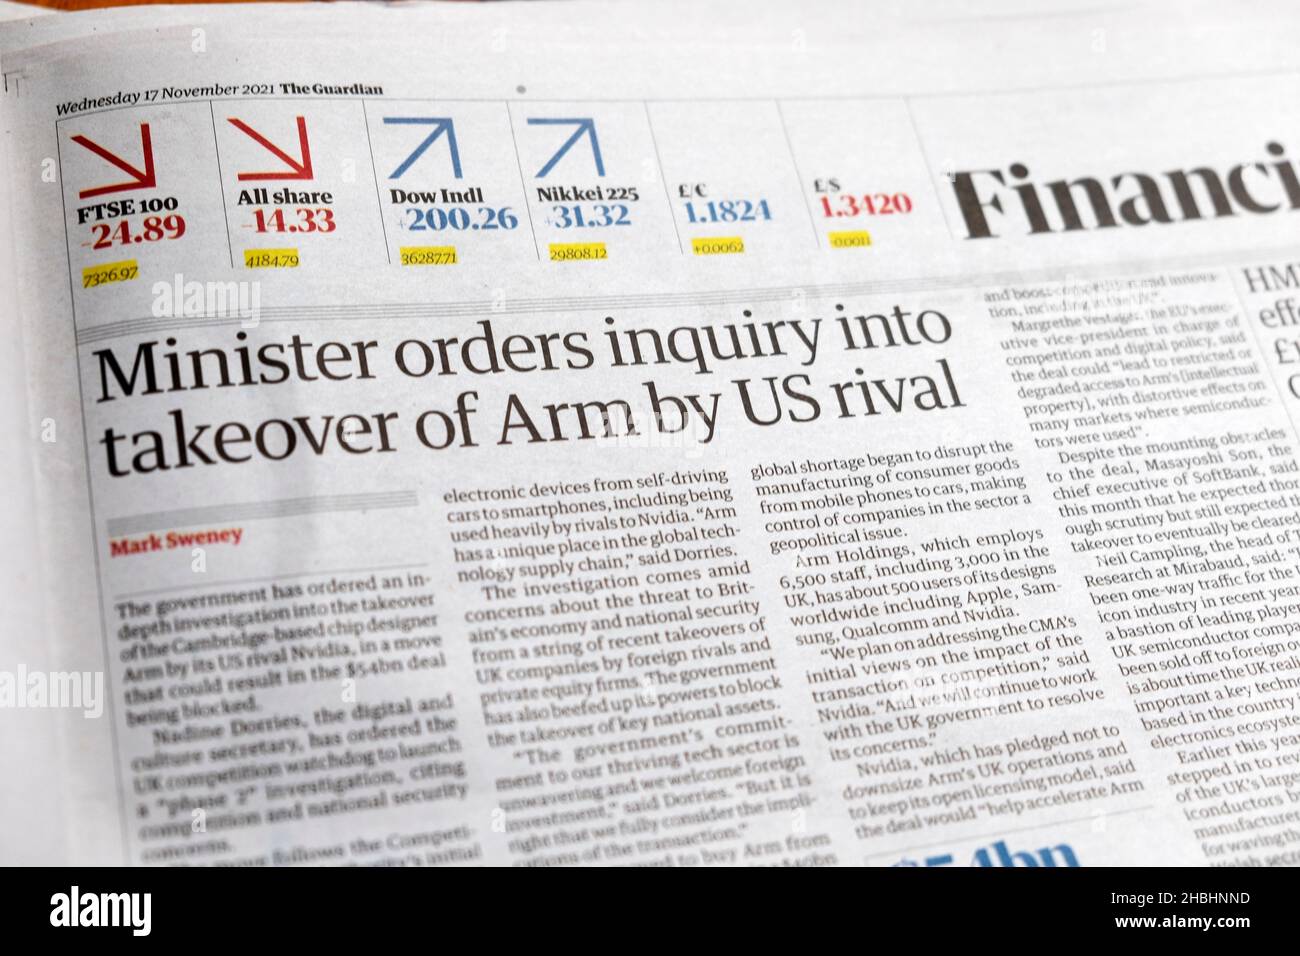 'Minister orders inquiry into takeover of Arm by US rival' Guardian newspaper headline clipping article 17 November 2021 London England UK Stock Photo